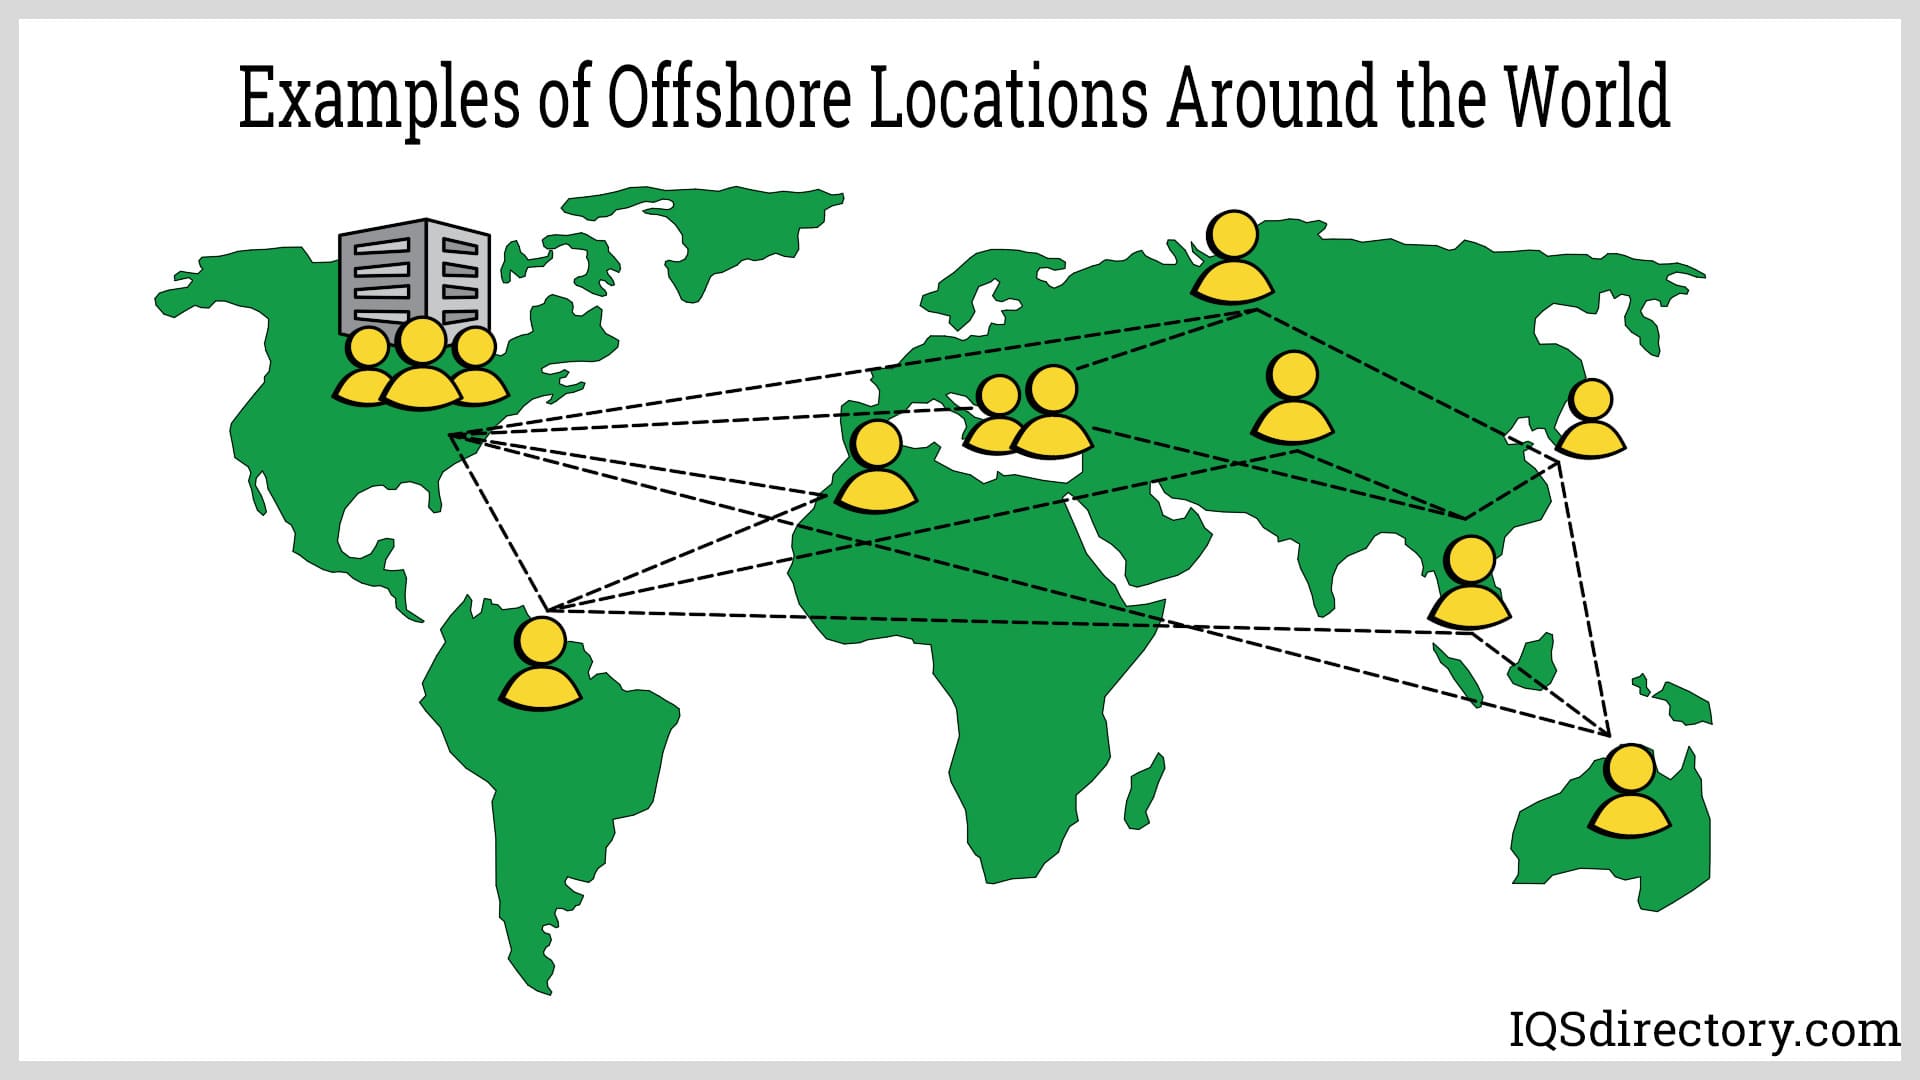 Examples of Offshore Locations Around the World